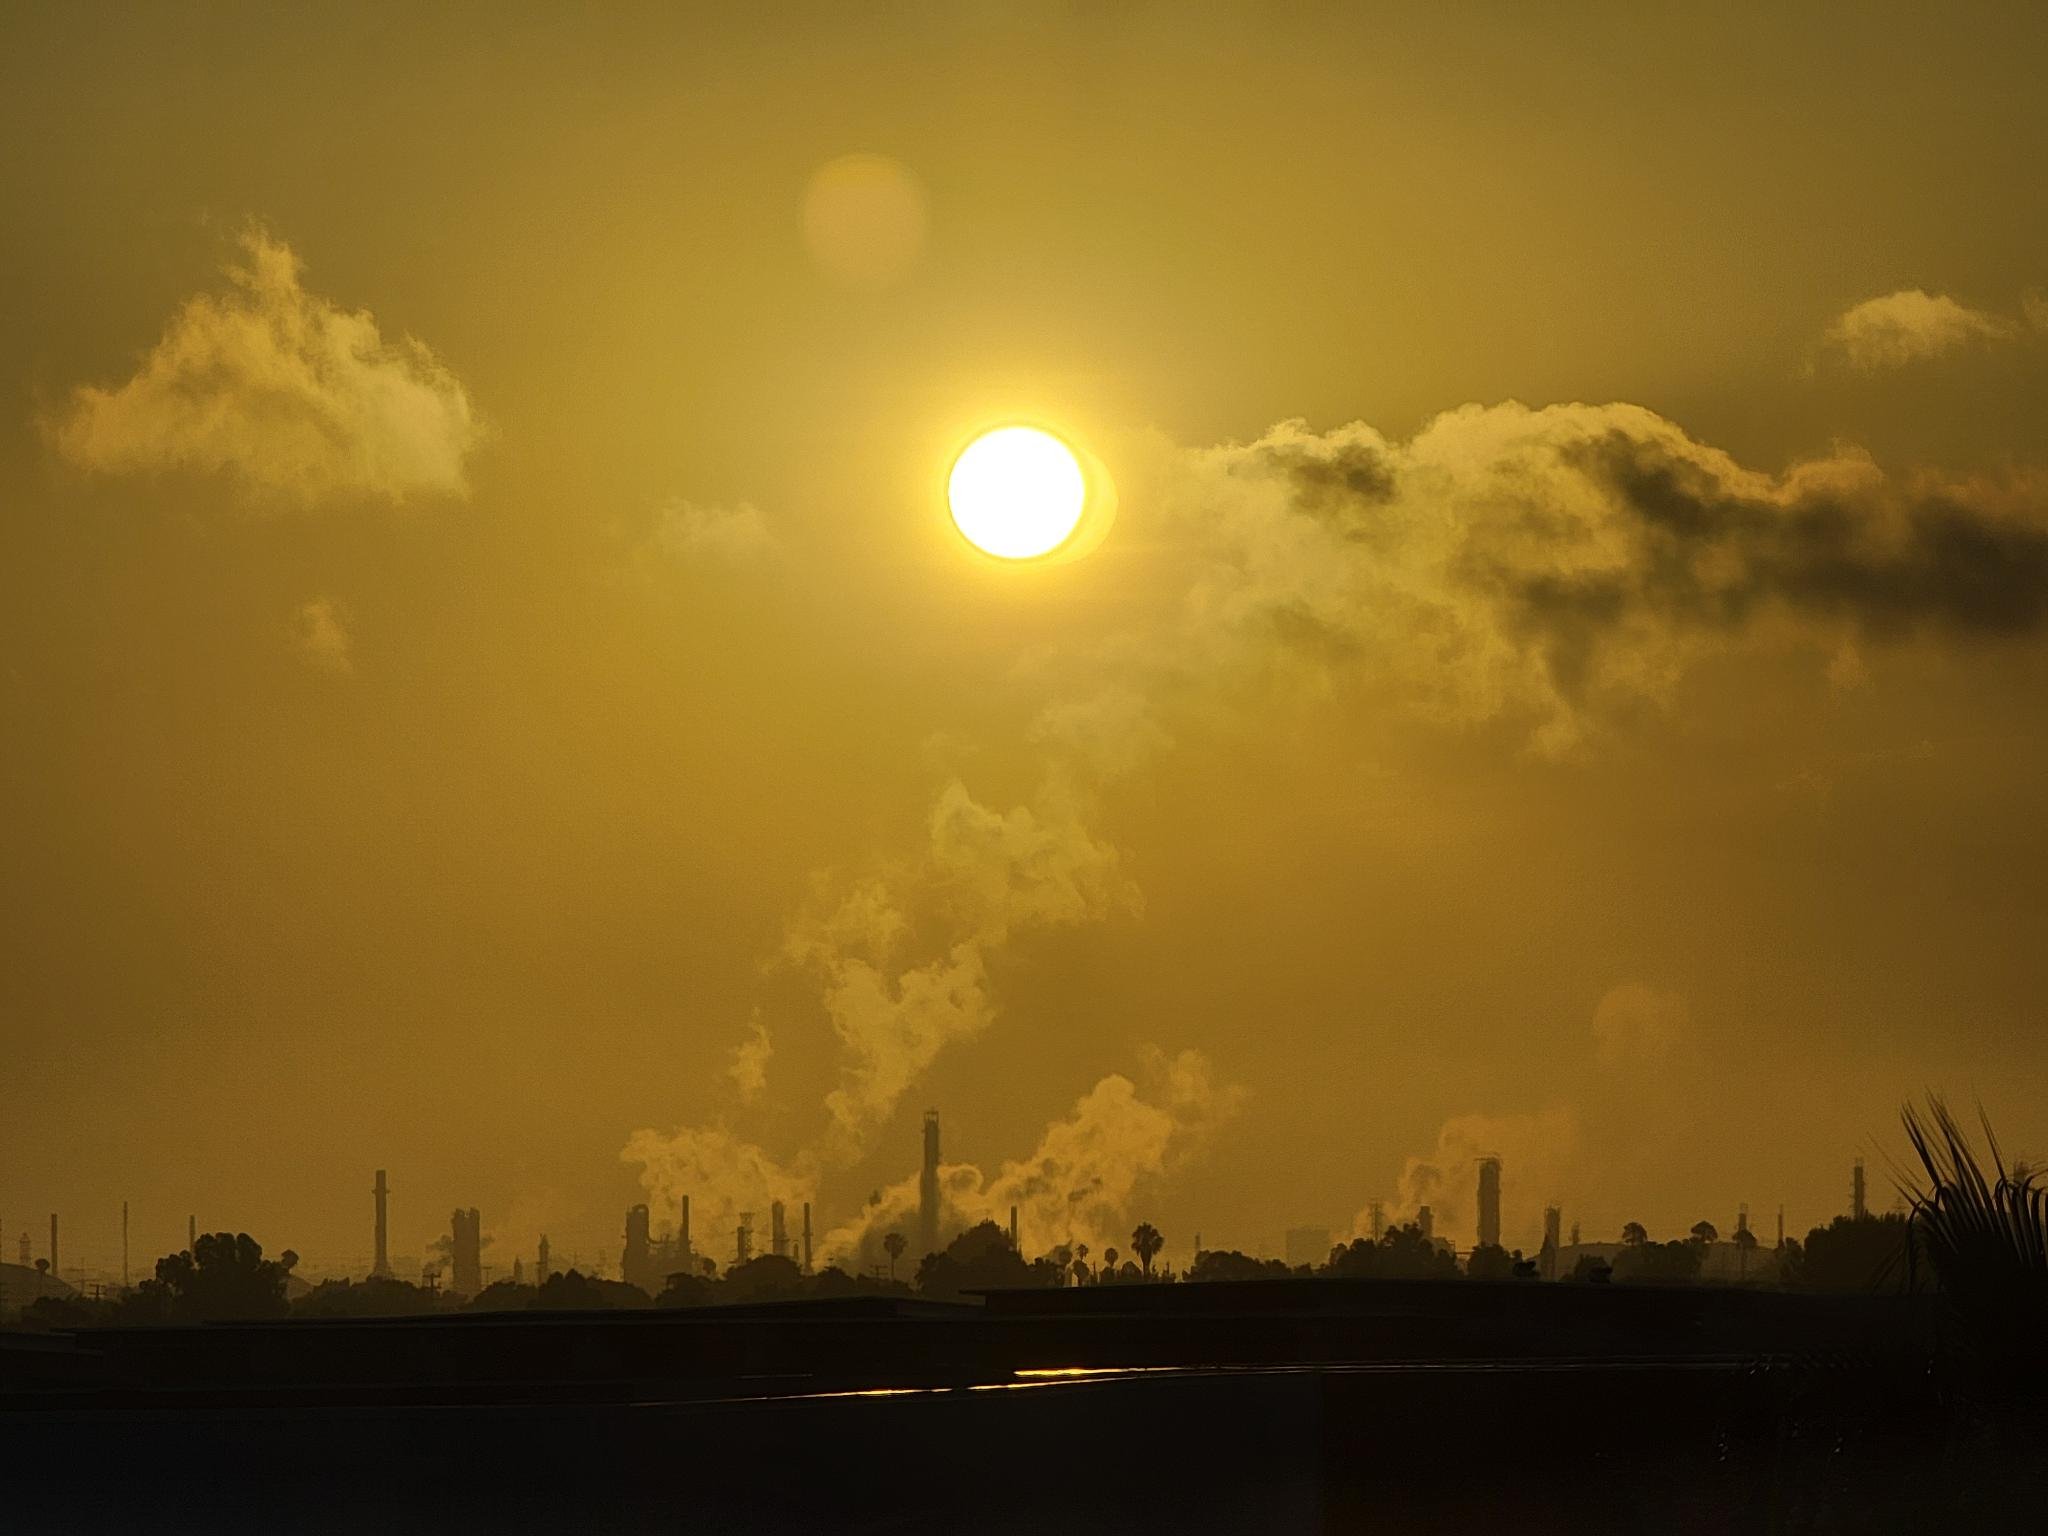 An oil refinery against a yellow sky and sun in the morning.